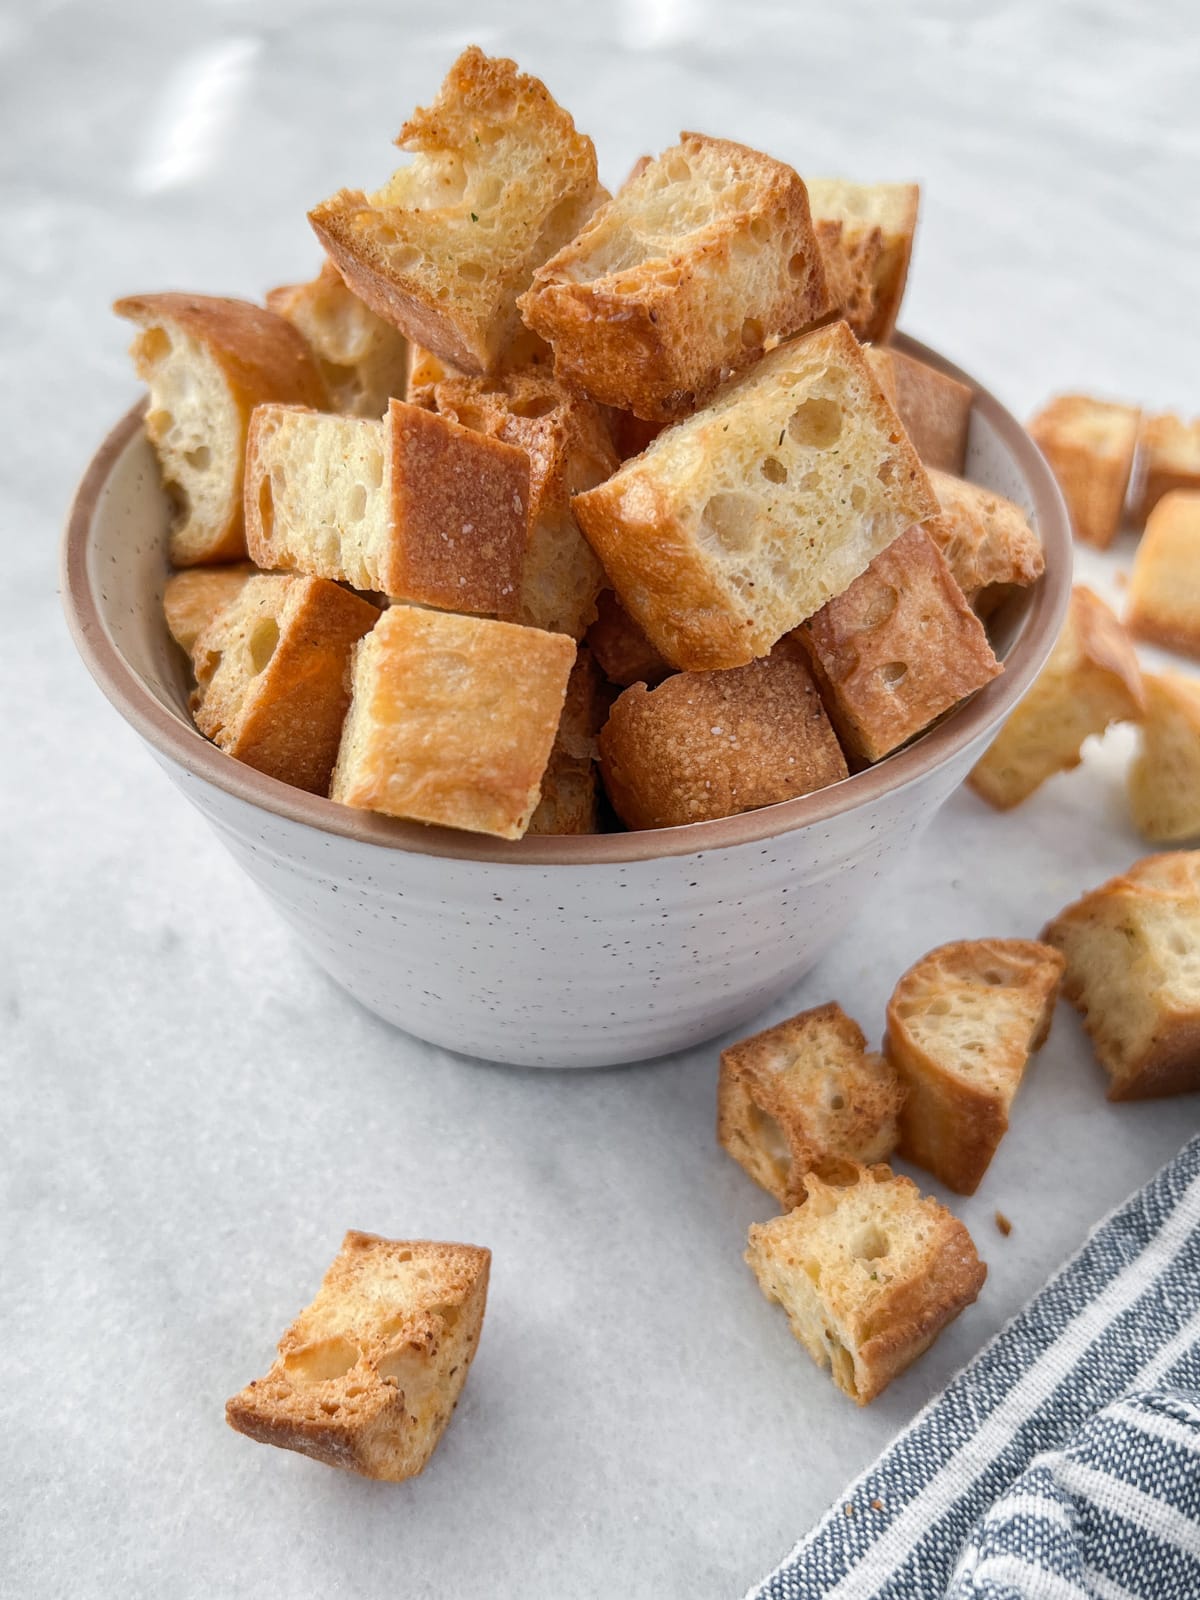 Bowlful of crispy croutons spilling out onto the countertop.